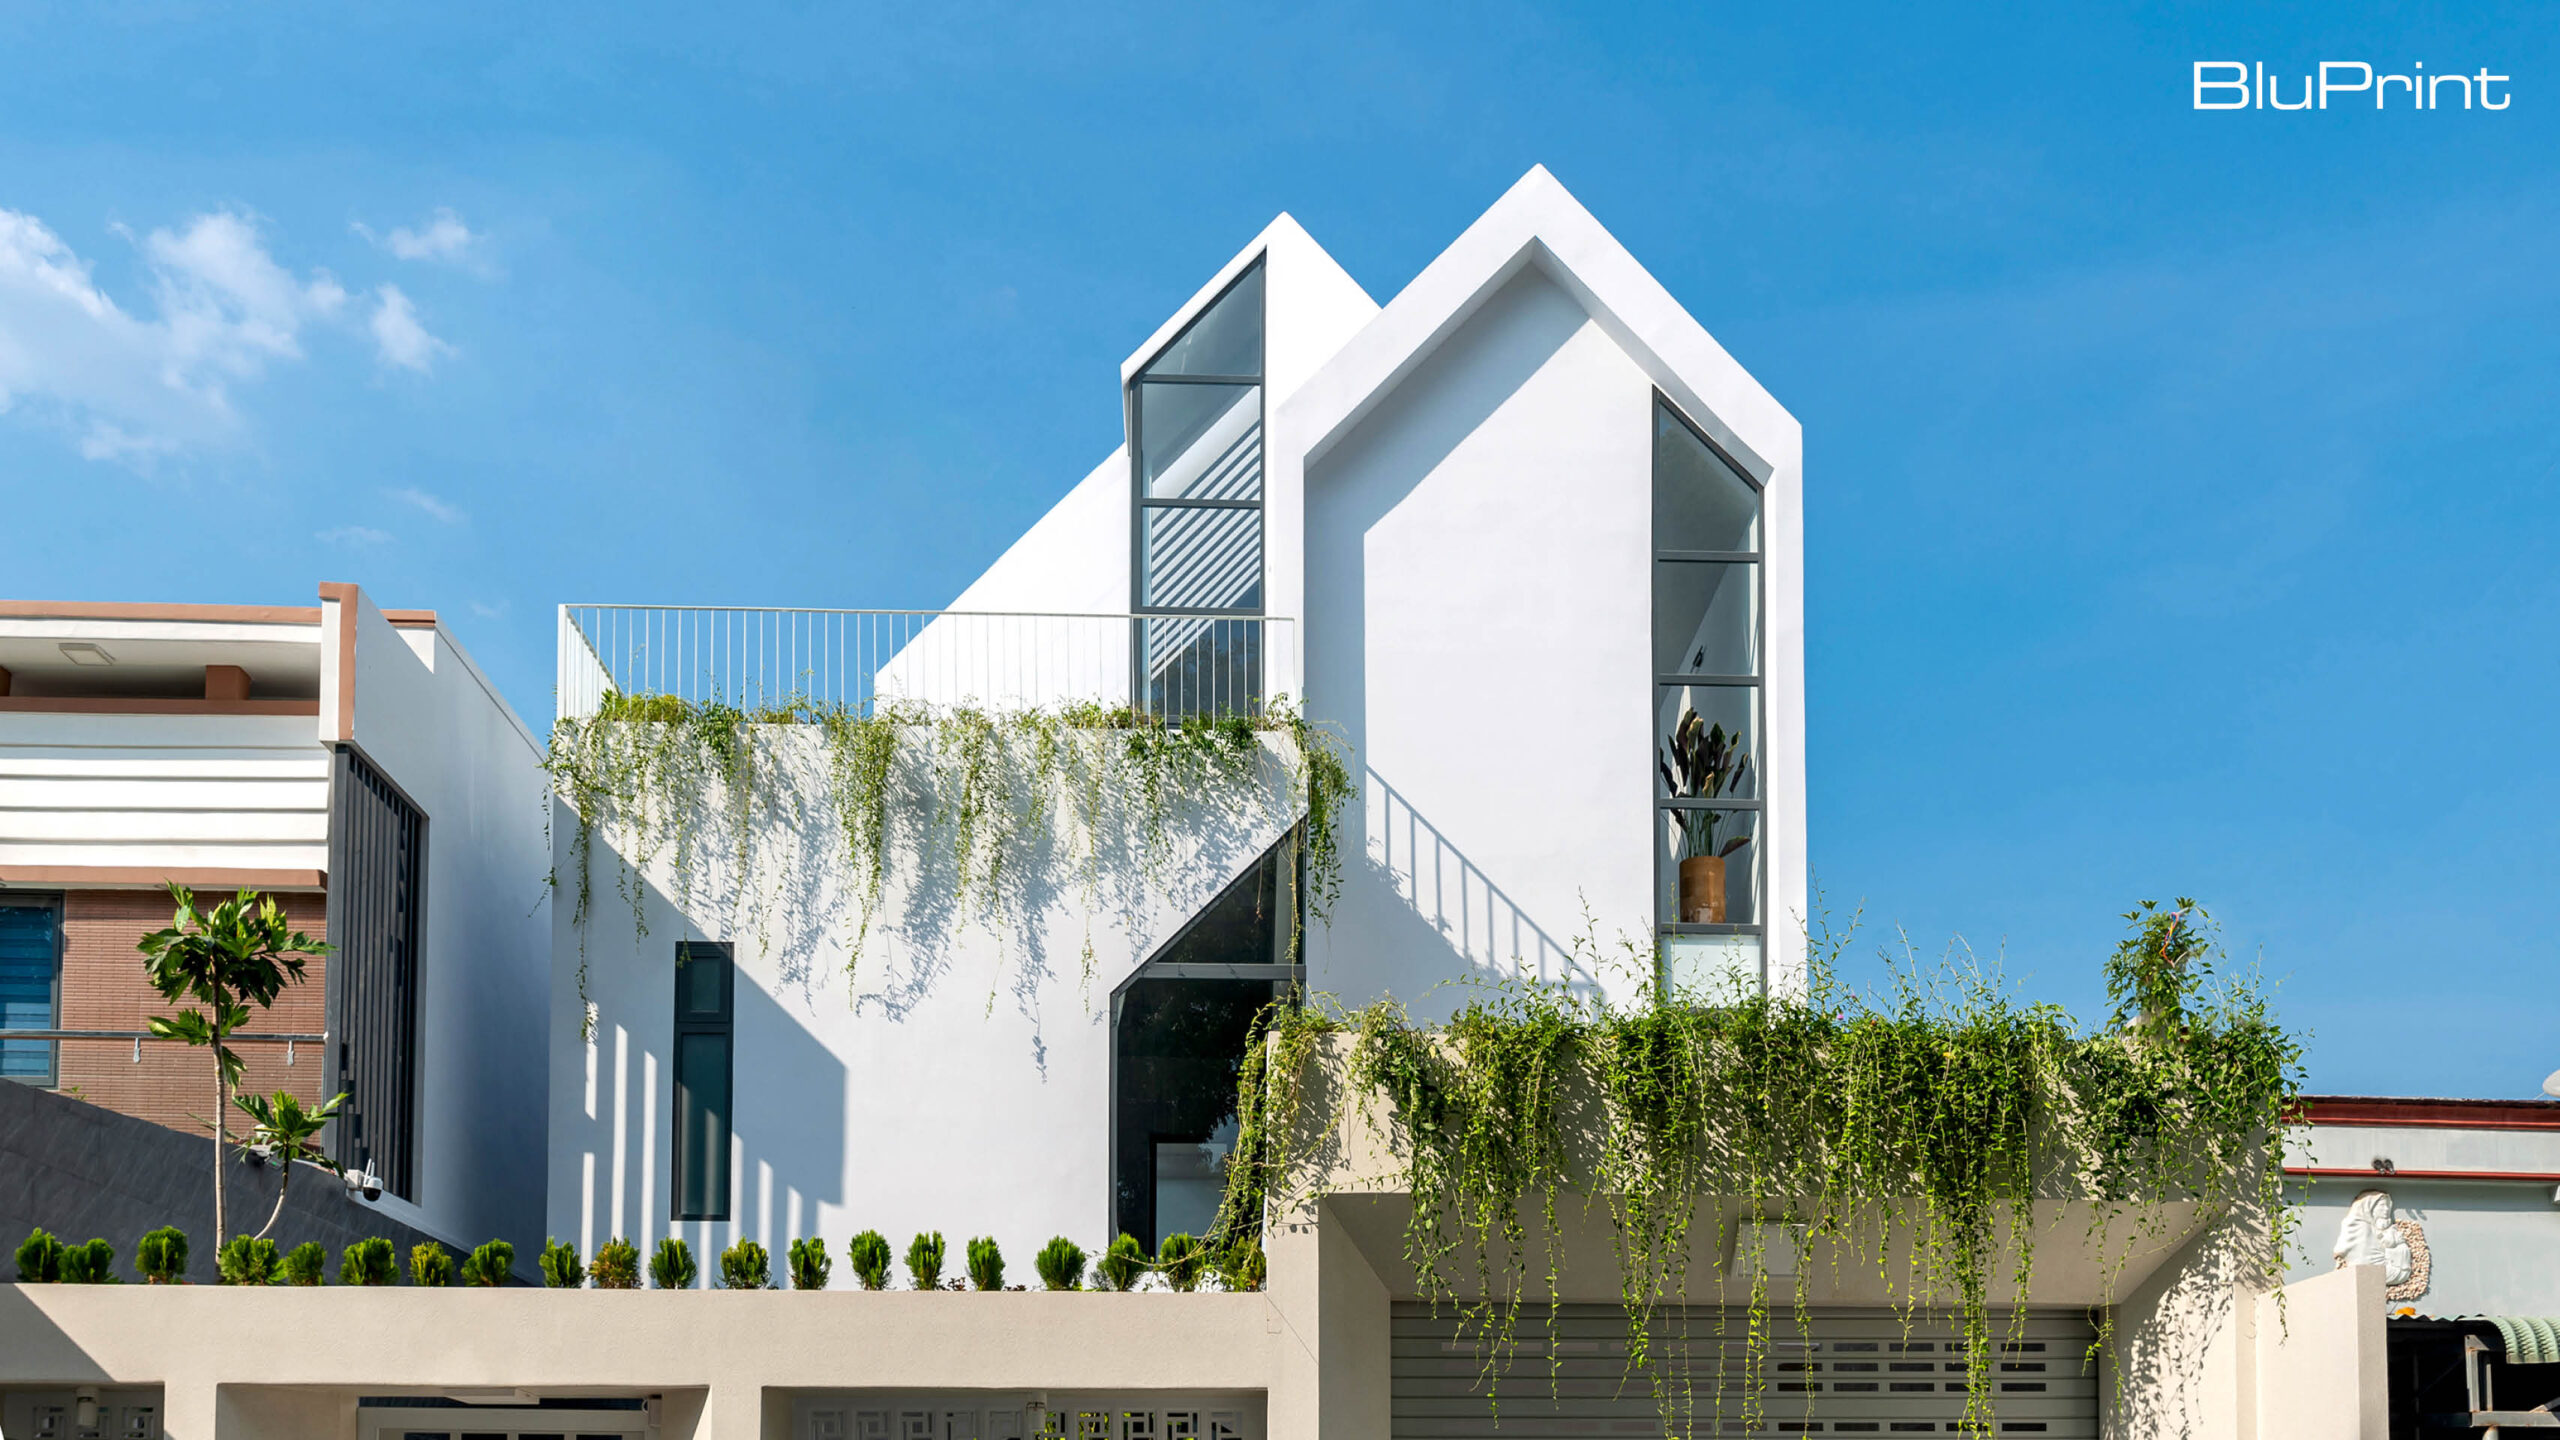 3 storey modernist white home with pitched roofs, vines hanging above the car port.